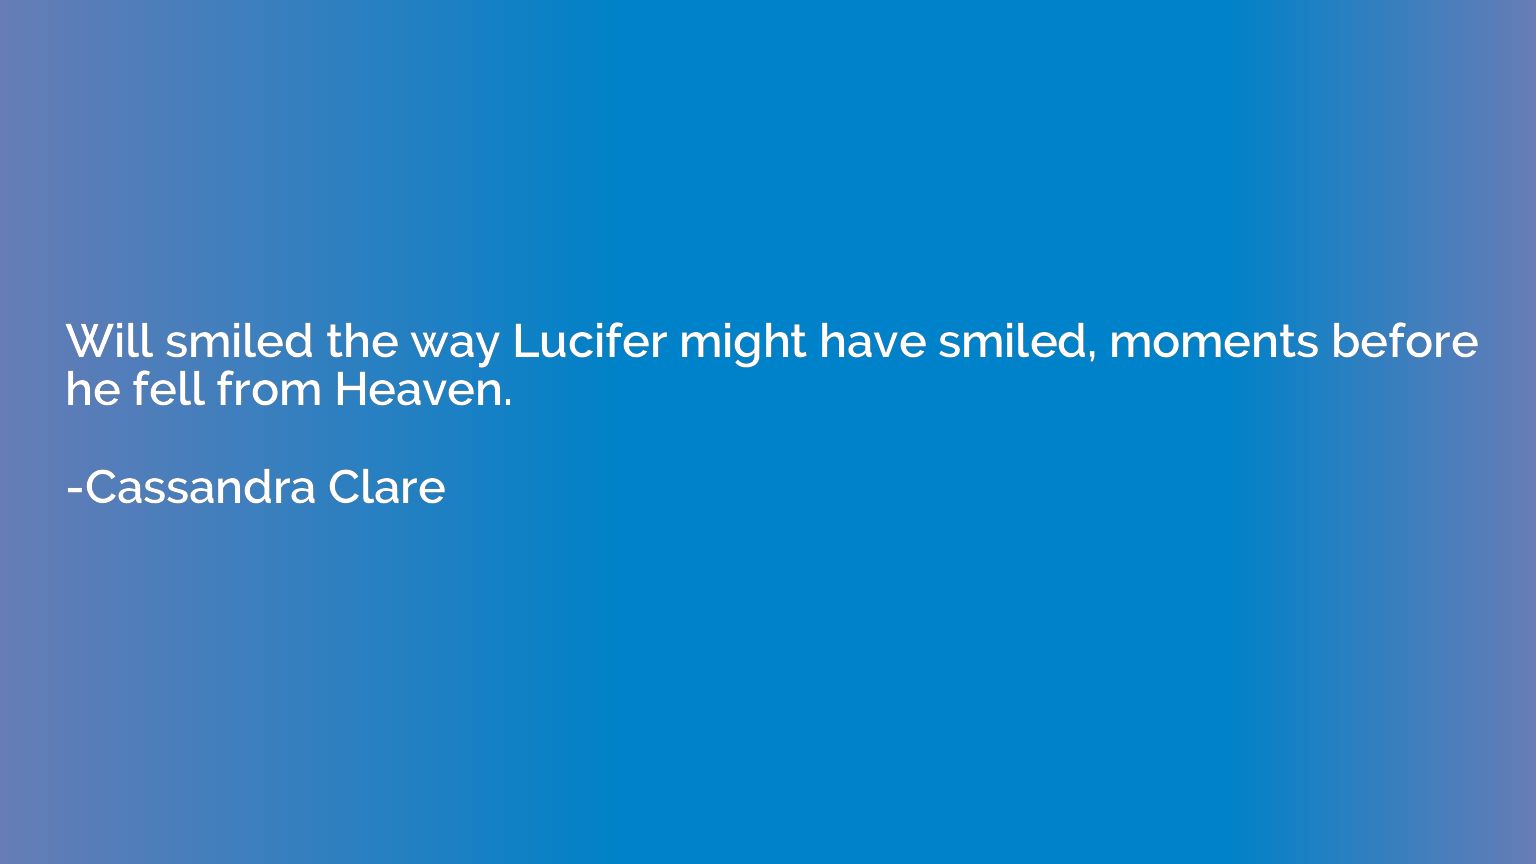 Will smiled the way Lucifer might have smiled, moments befor